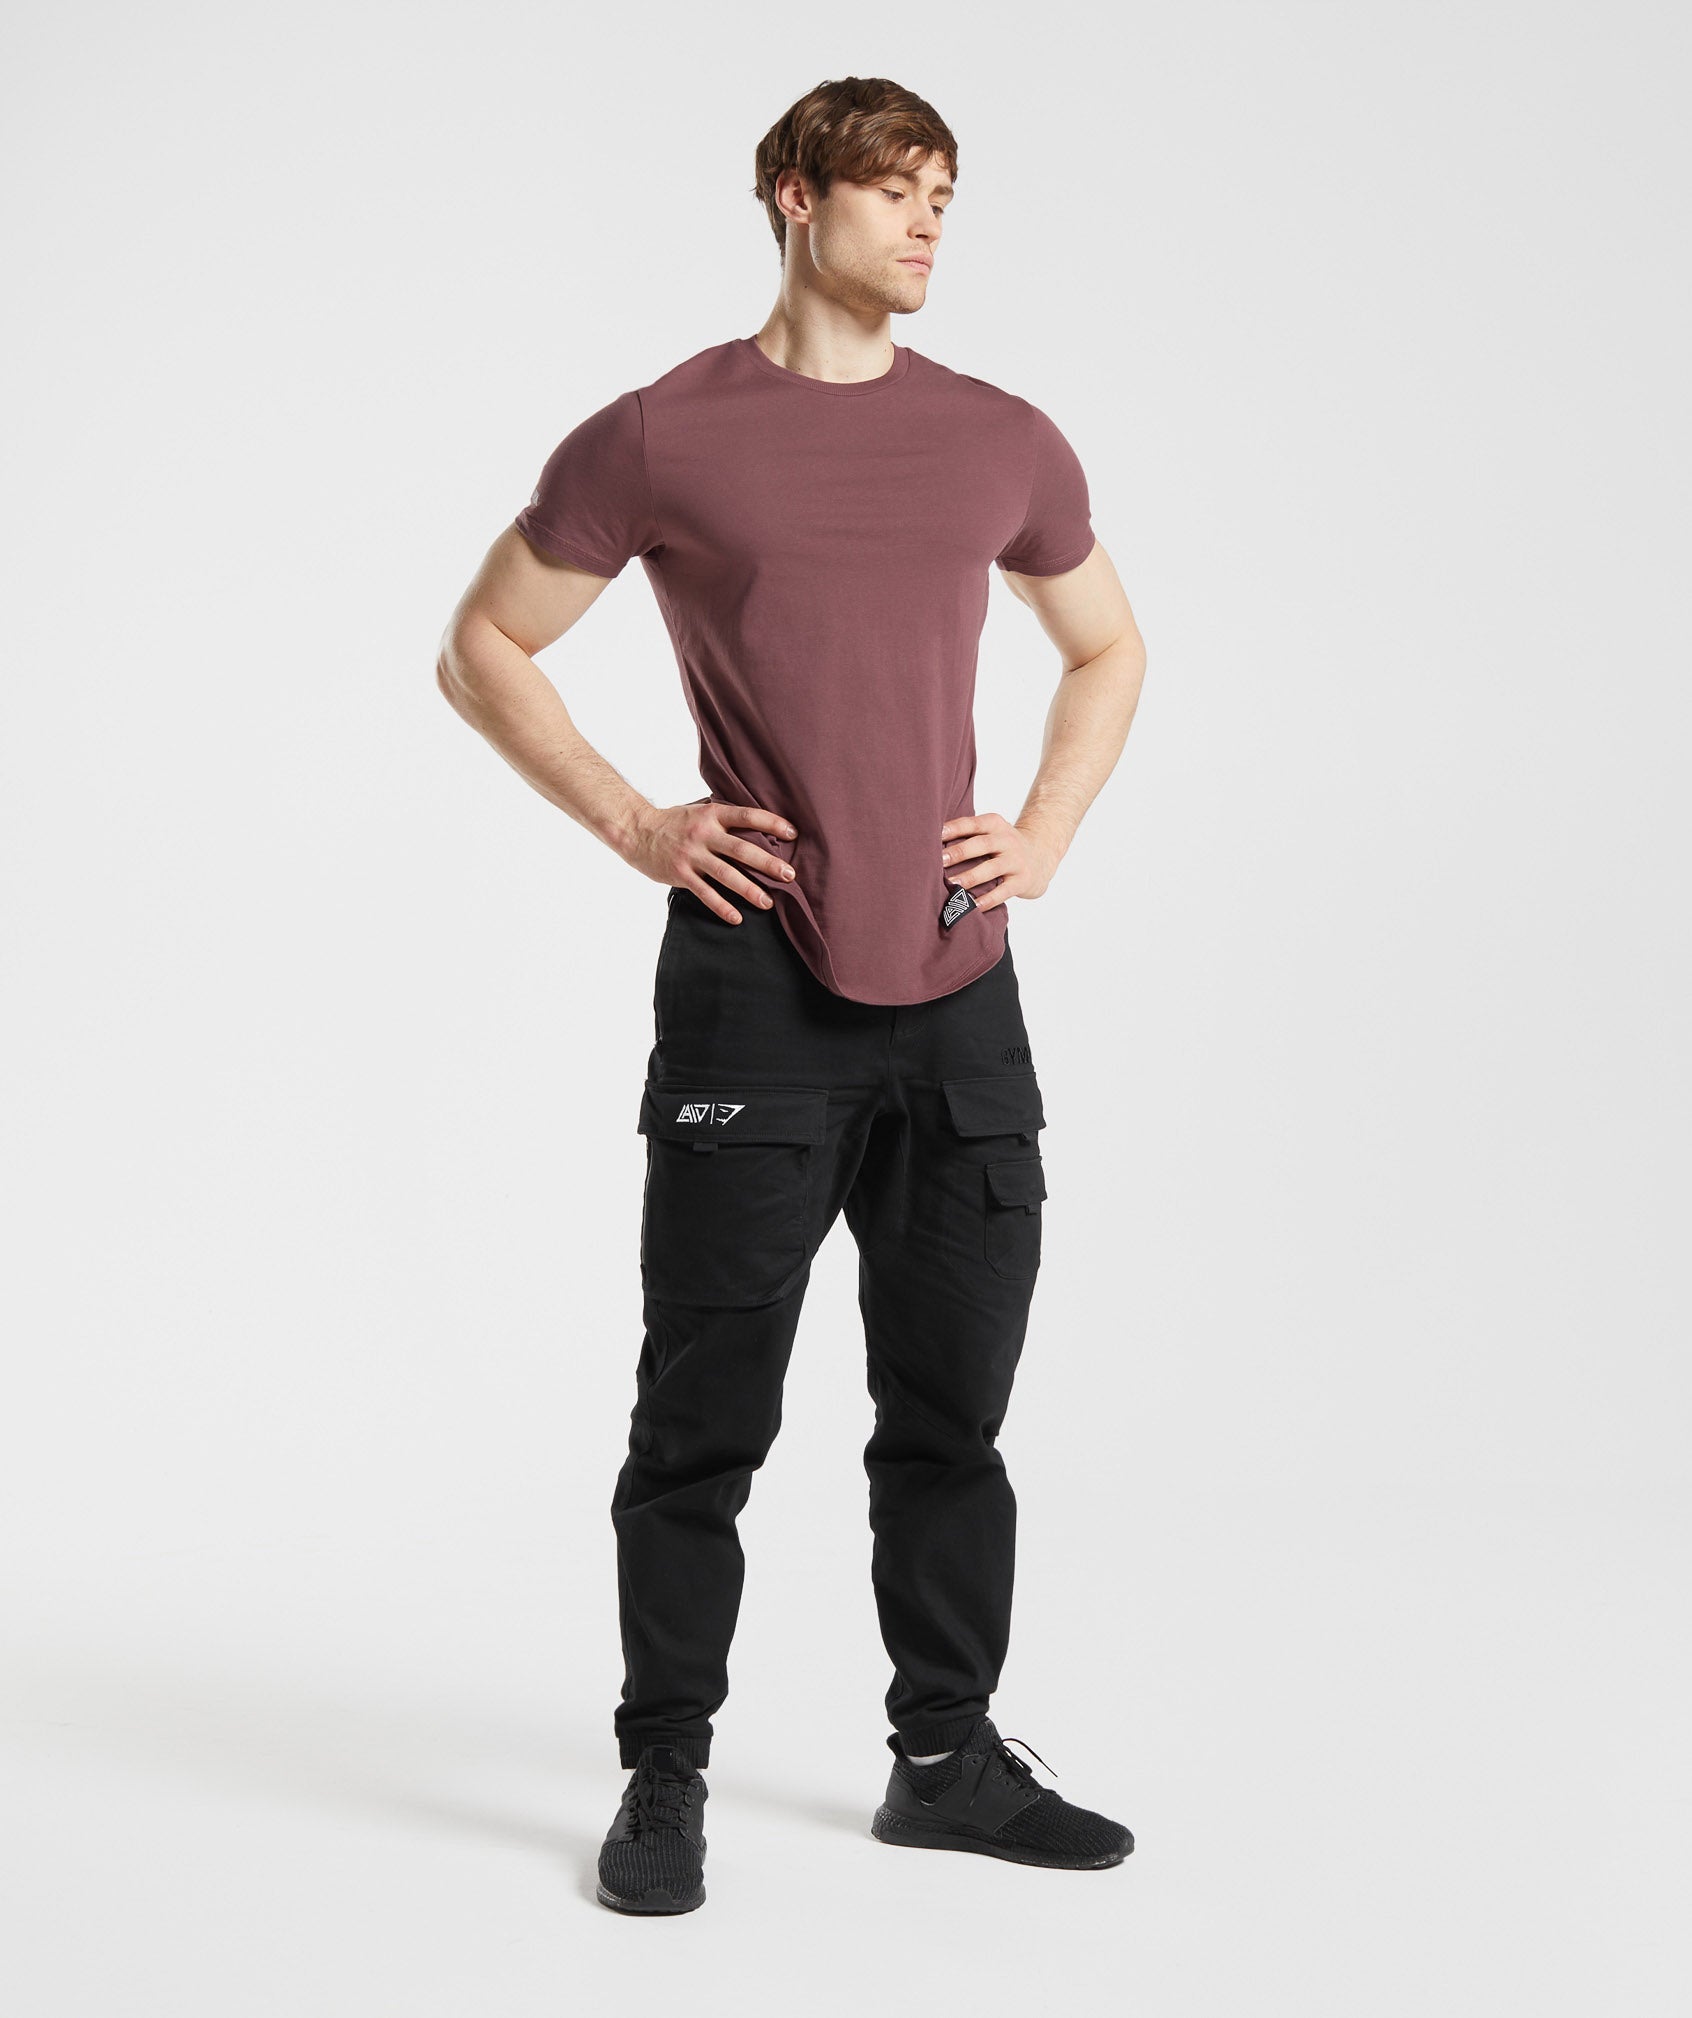 Gymshark x David Laid Cargo Pants - Size XL - Impossible to find